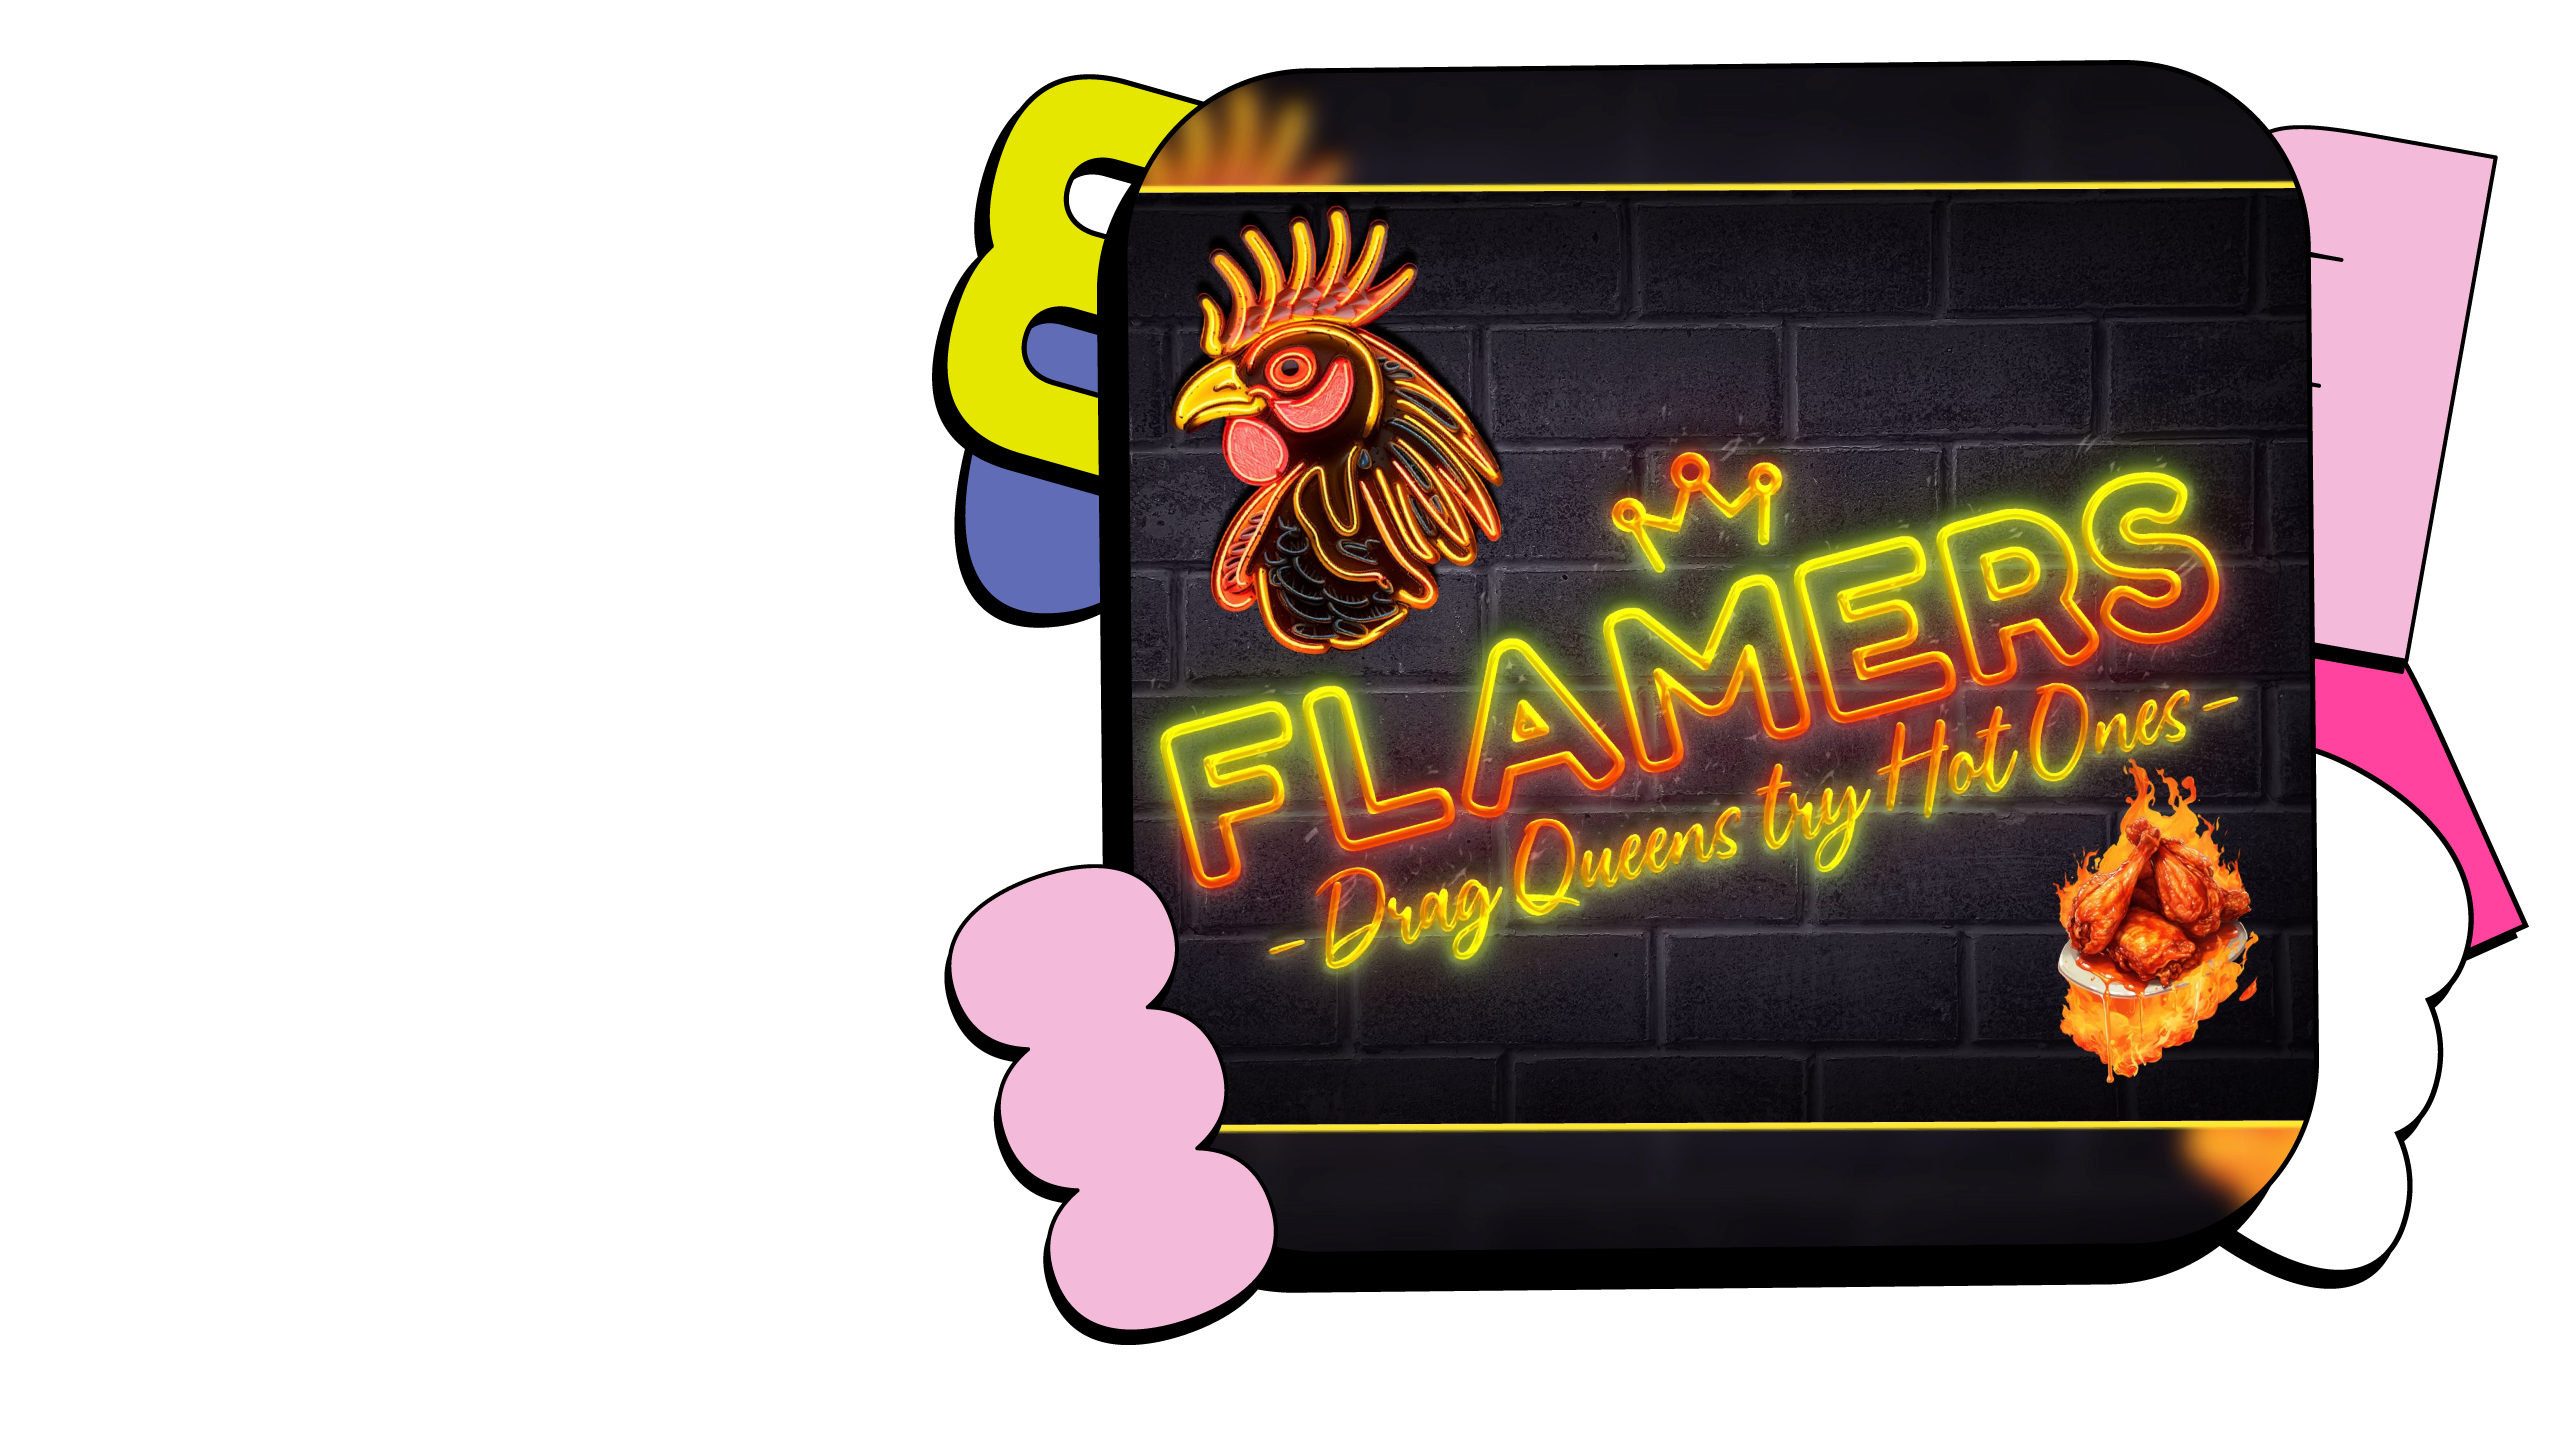 Promotional image for Flamers: Drag Queens Try Hot Ones